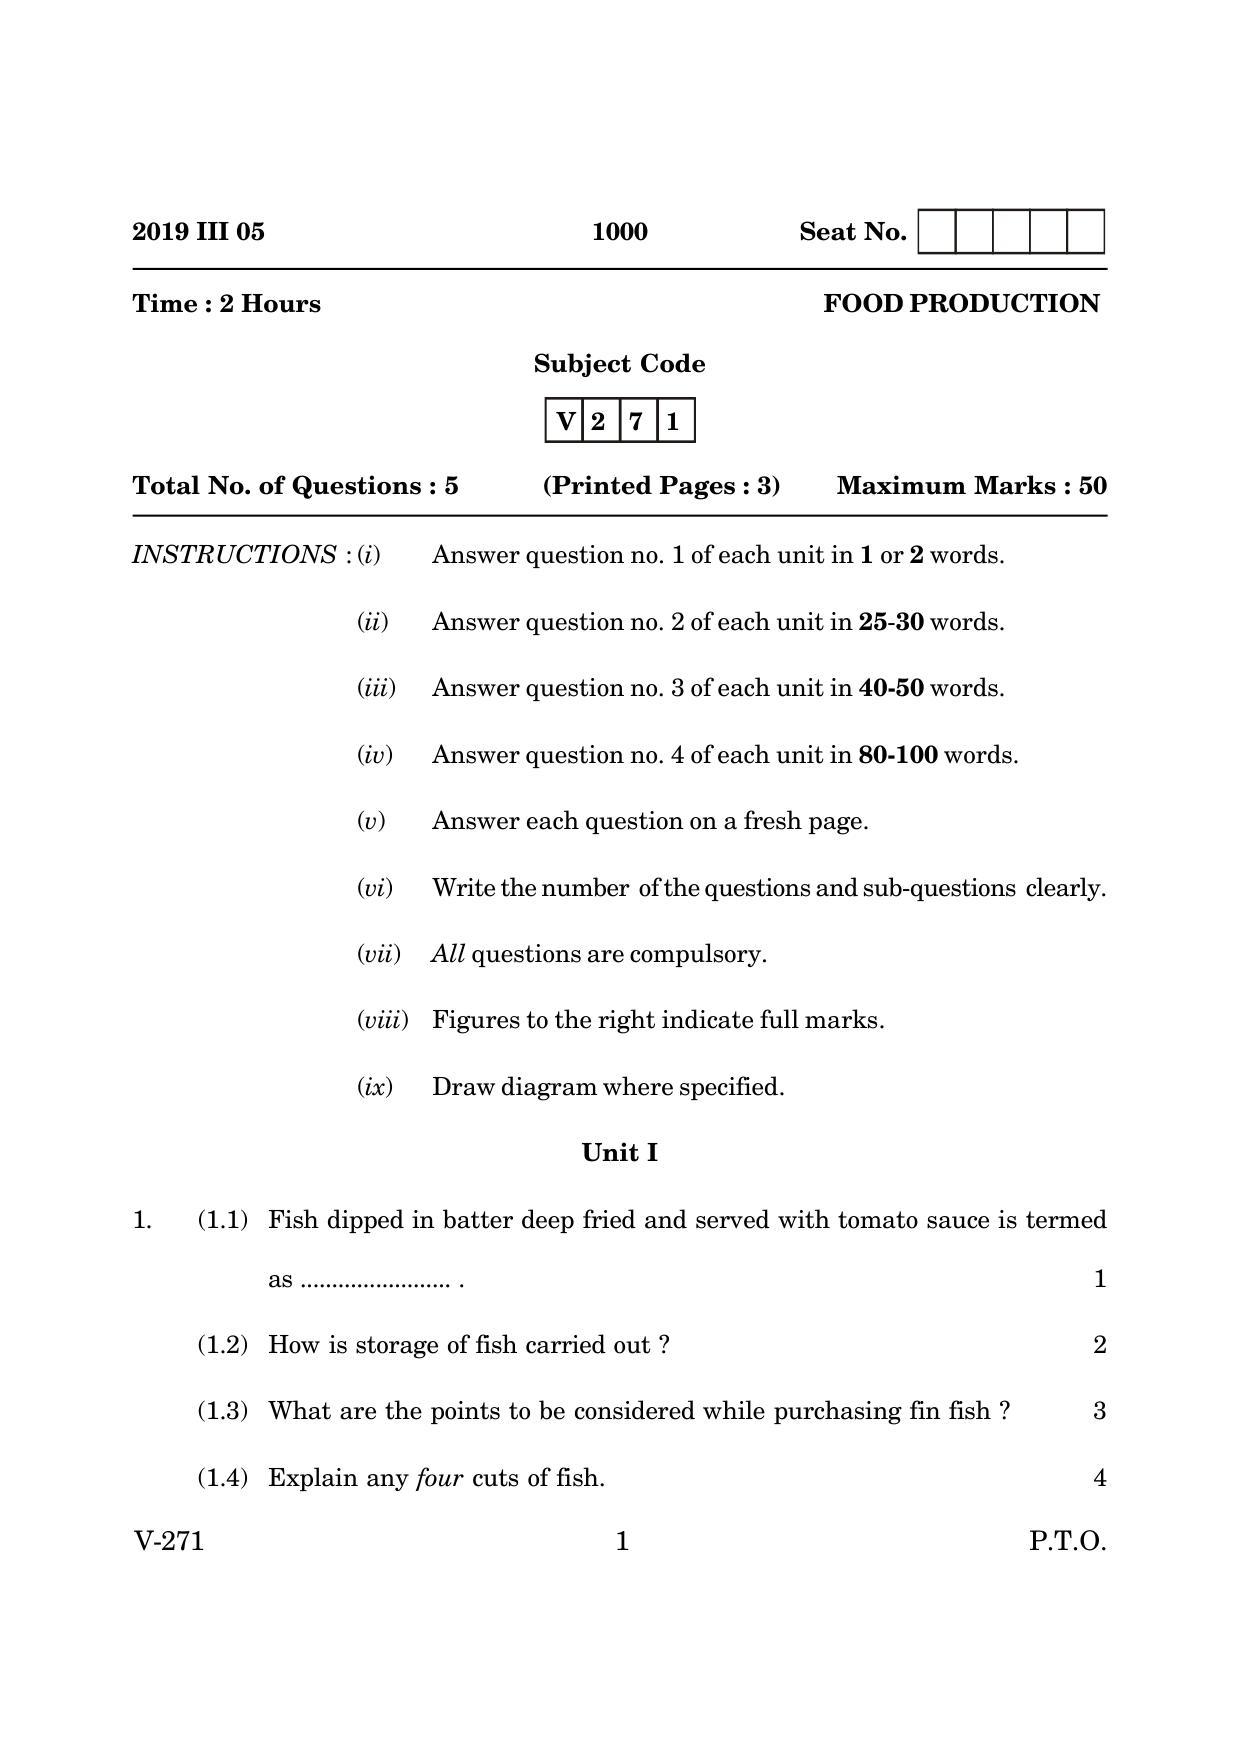 Goa Board Class 12 Food Production   (March 2019) Question Paper - Page 1